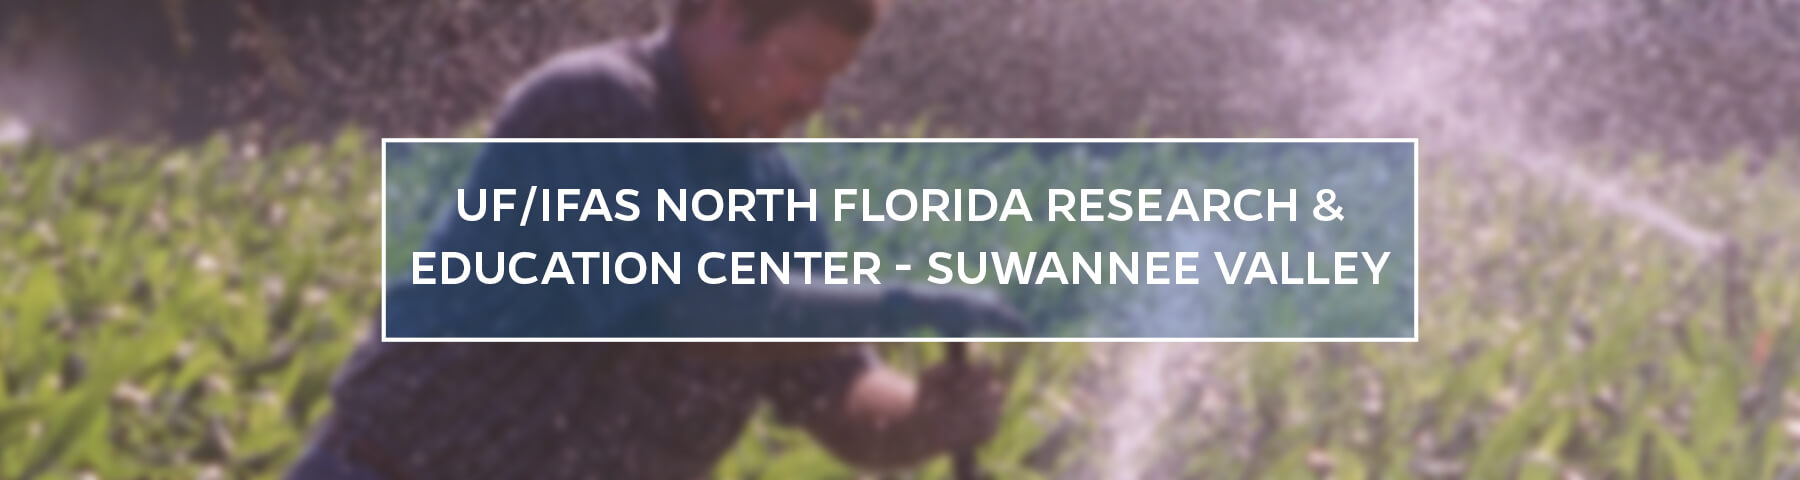 UF/IFAS North Florida Research and Education Center - Suwannee Valley